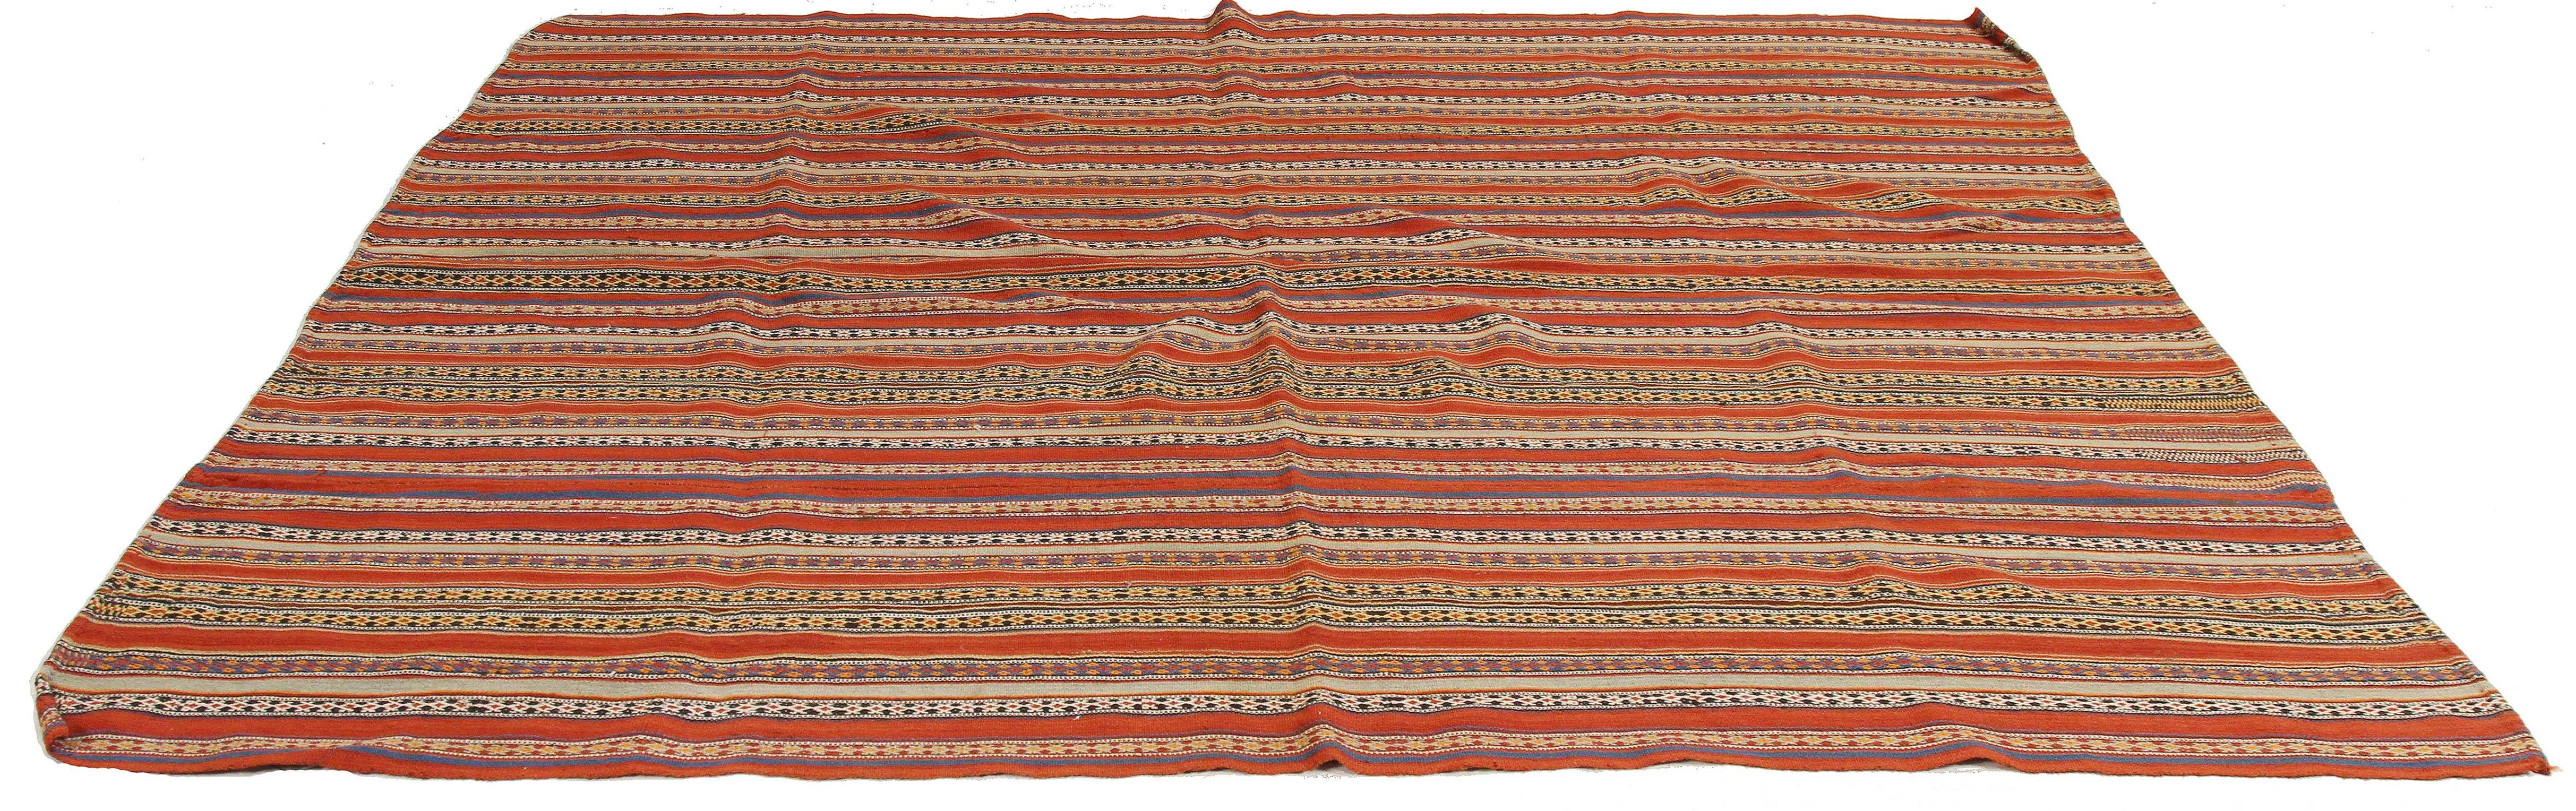 Antique Persian rug handwoven from the finest sheep’s wool and colored with all-natural vegetable dyes that are safe for humans and pets. It’s a traditional Jajim flat-weave design featuring a red and blue striped field adorned with tribal details.